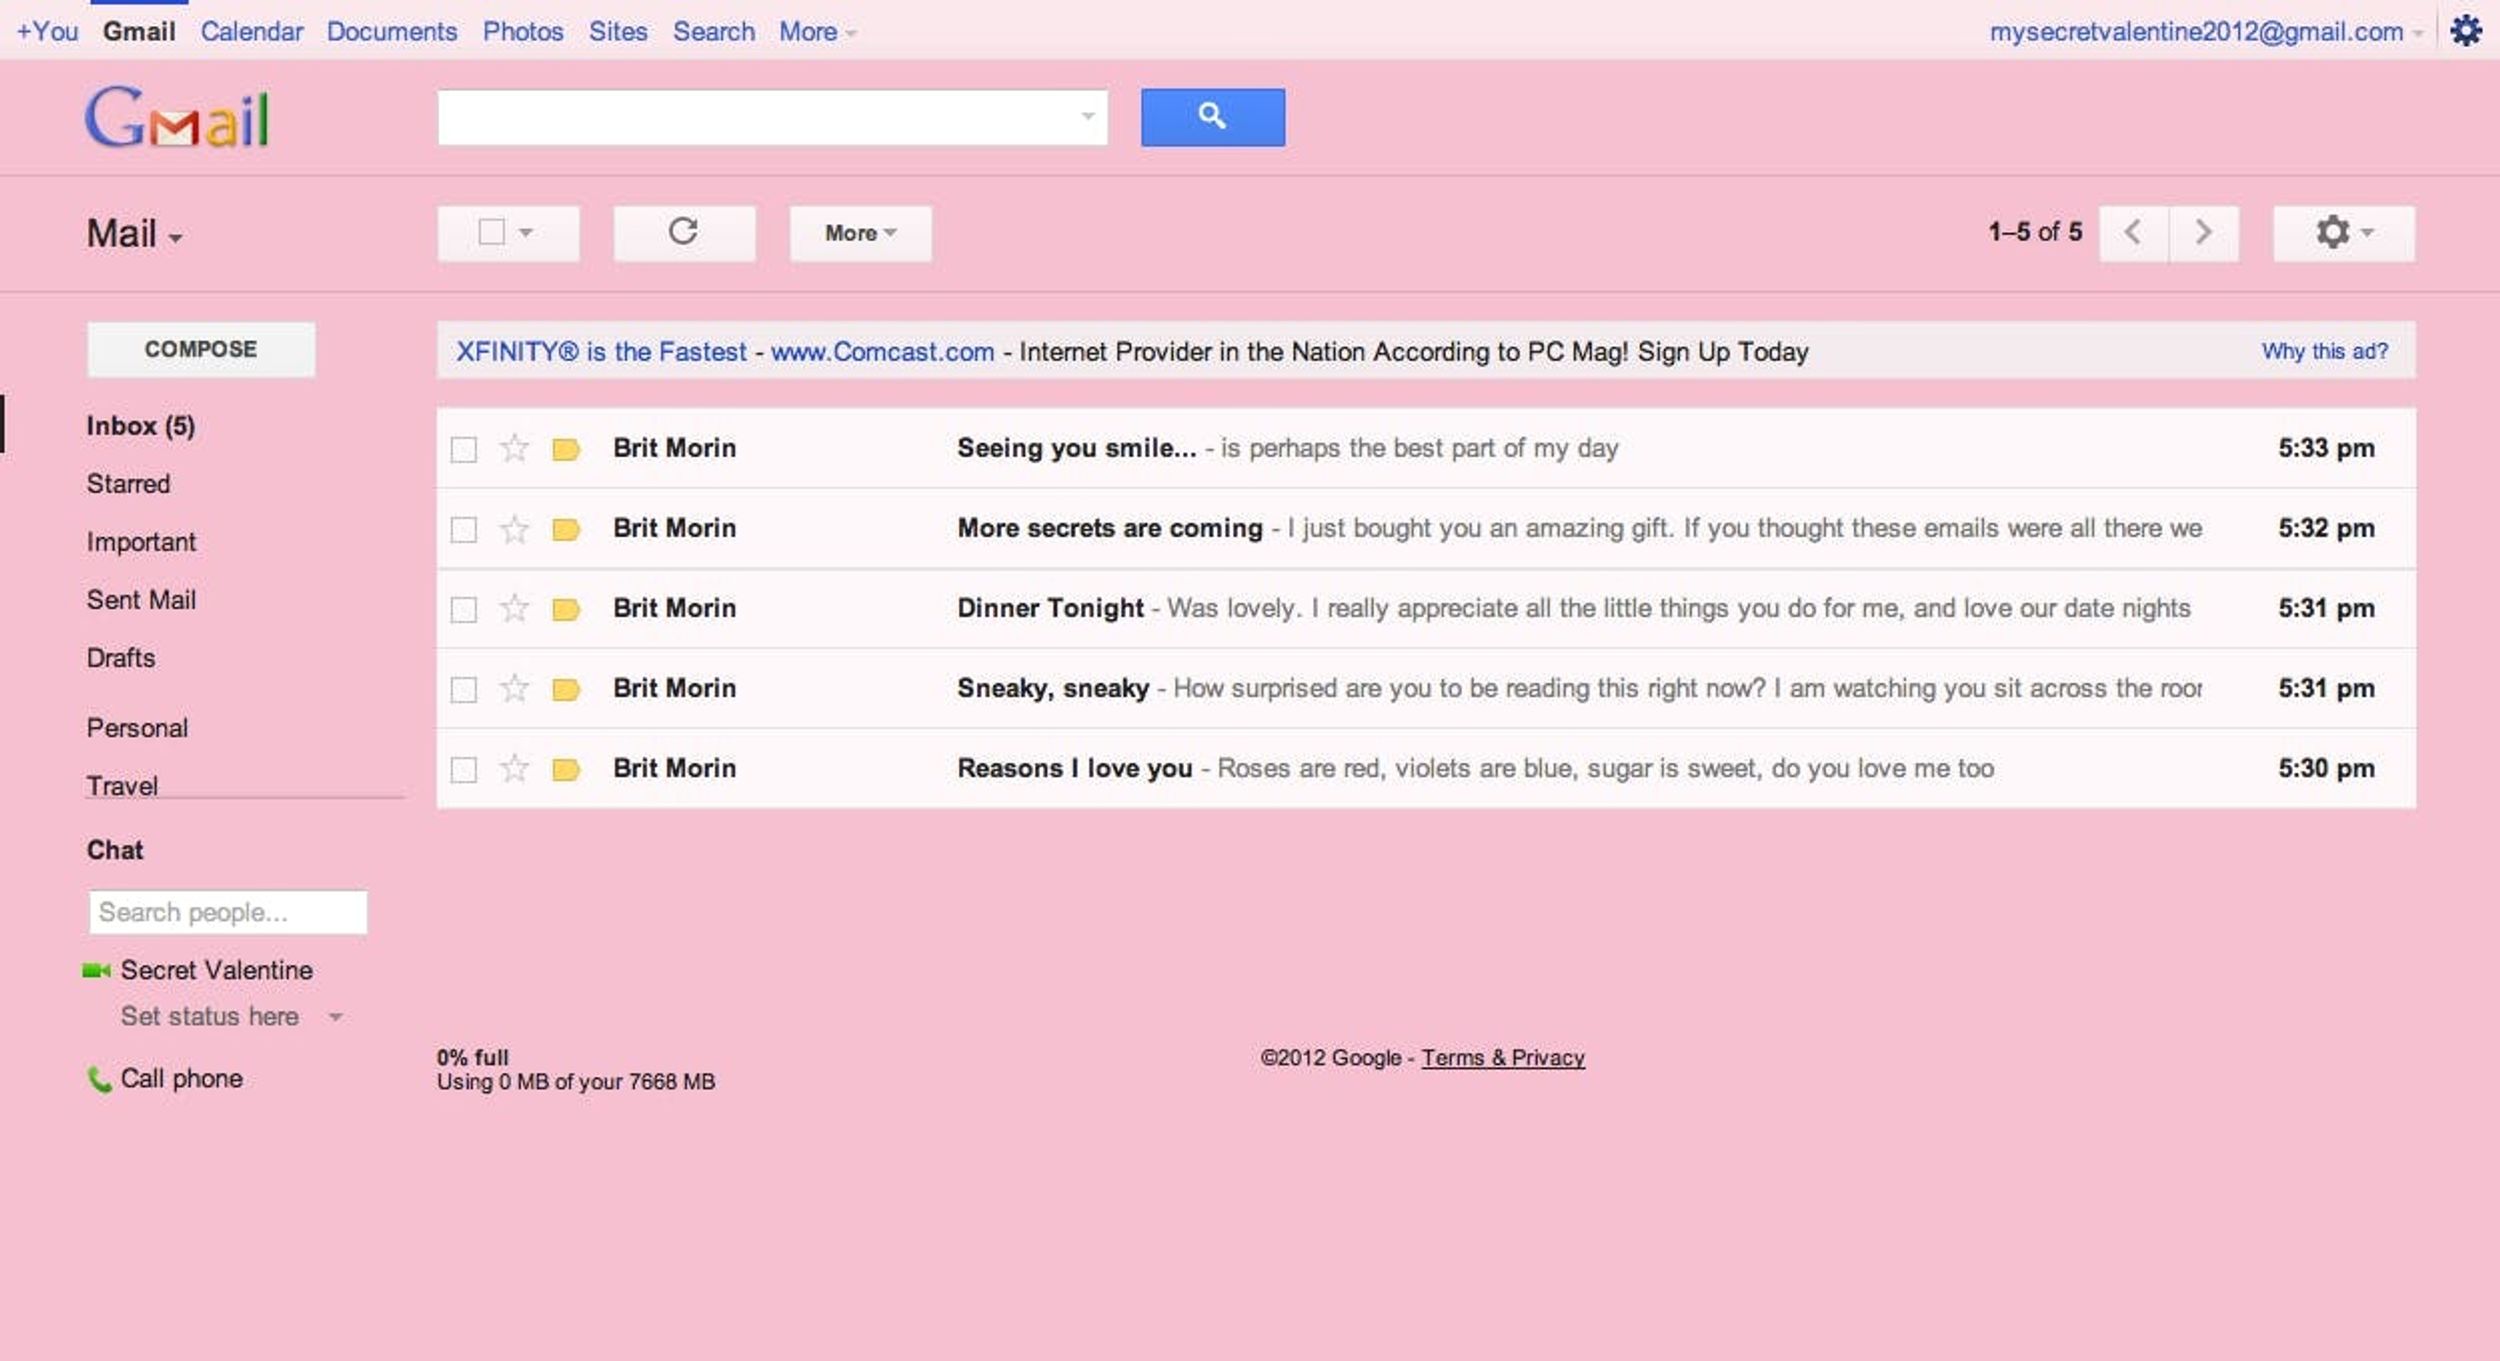 A Creative Way To Use Gmail To Send Valentine’s Day Cards